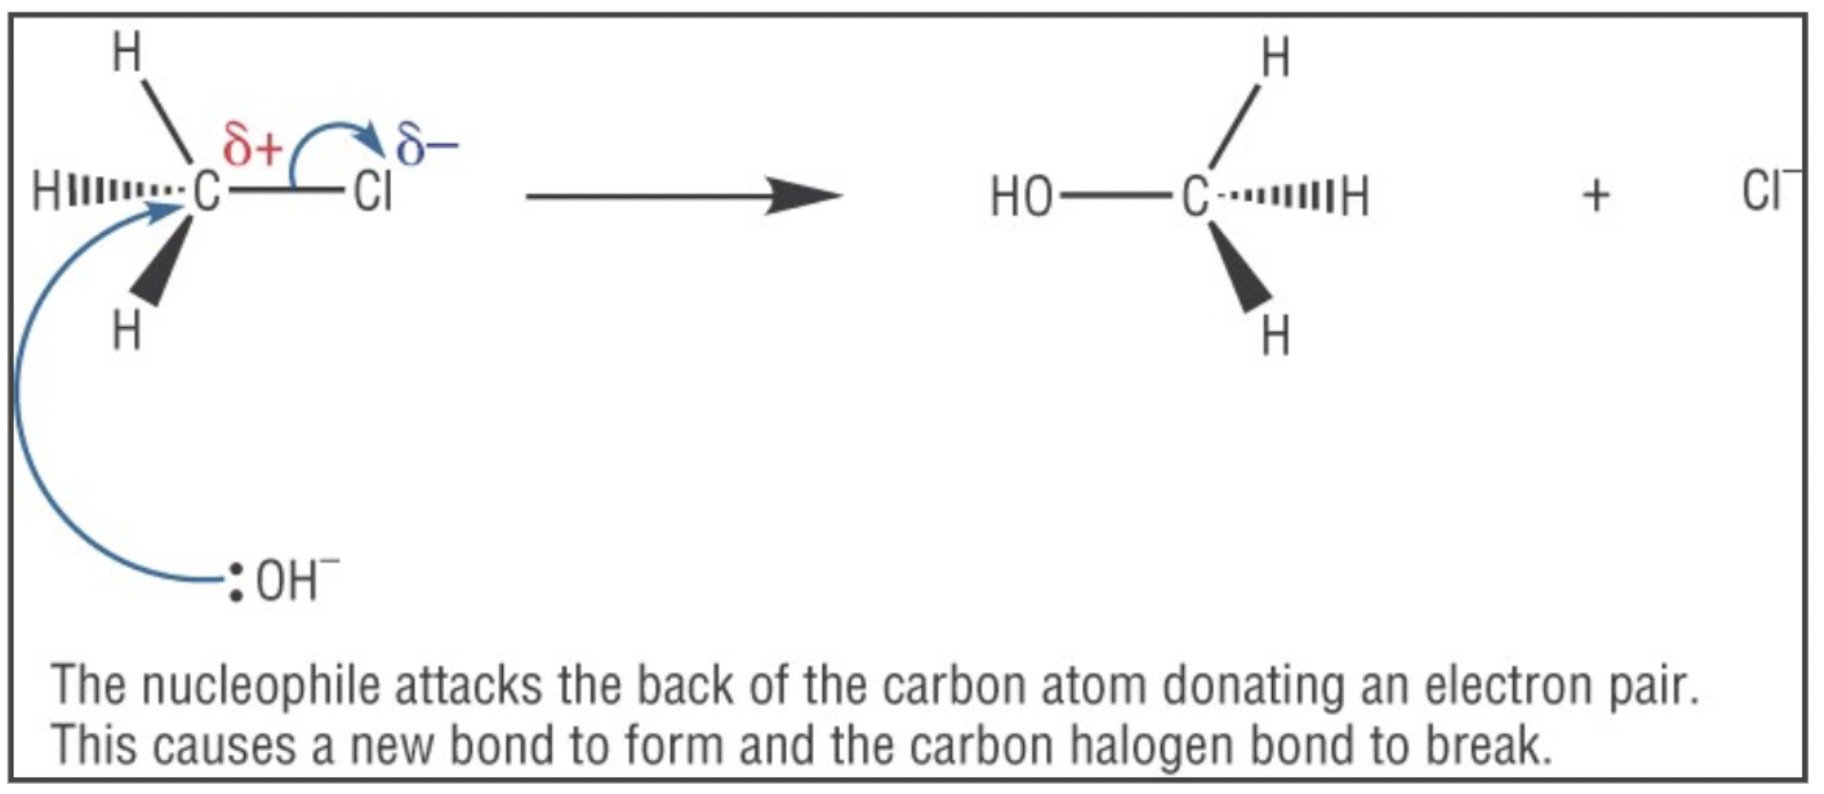 <ul><li><p>haloalkane —&gt; alcohol</p></li><li><p>In a halogenoalkane molecule, the halogen acts as a nucleophile due to its three lone pairs of electrons.</p></li><li><p>Carbon atom undergoes heterolytic bond fission with the halogen, where the halogen takes the bonding electrons.</p></li><li><p>Often with strong bases like NaOH</p></li><li><p>Nucleophilic halogen is replaced by another nucleophilic ion.</p></li><li><p>The reaction conditions for this conversion are heat and a dilute solution of sodium or potassium hydroxide.</p></li></ul>